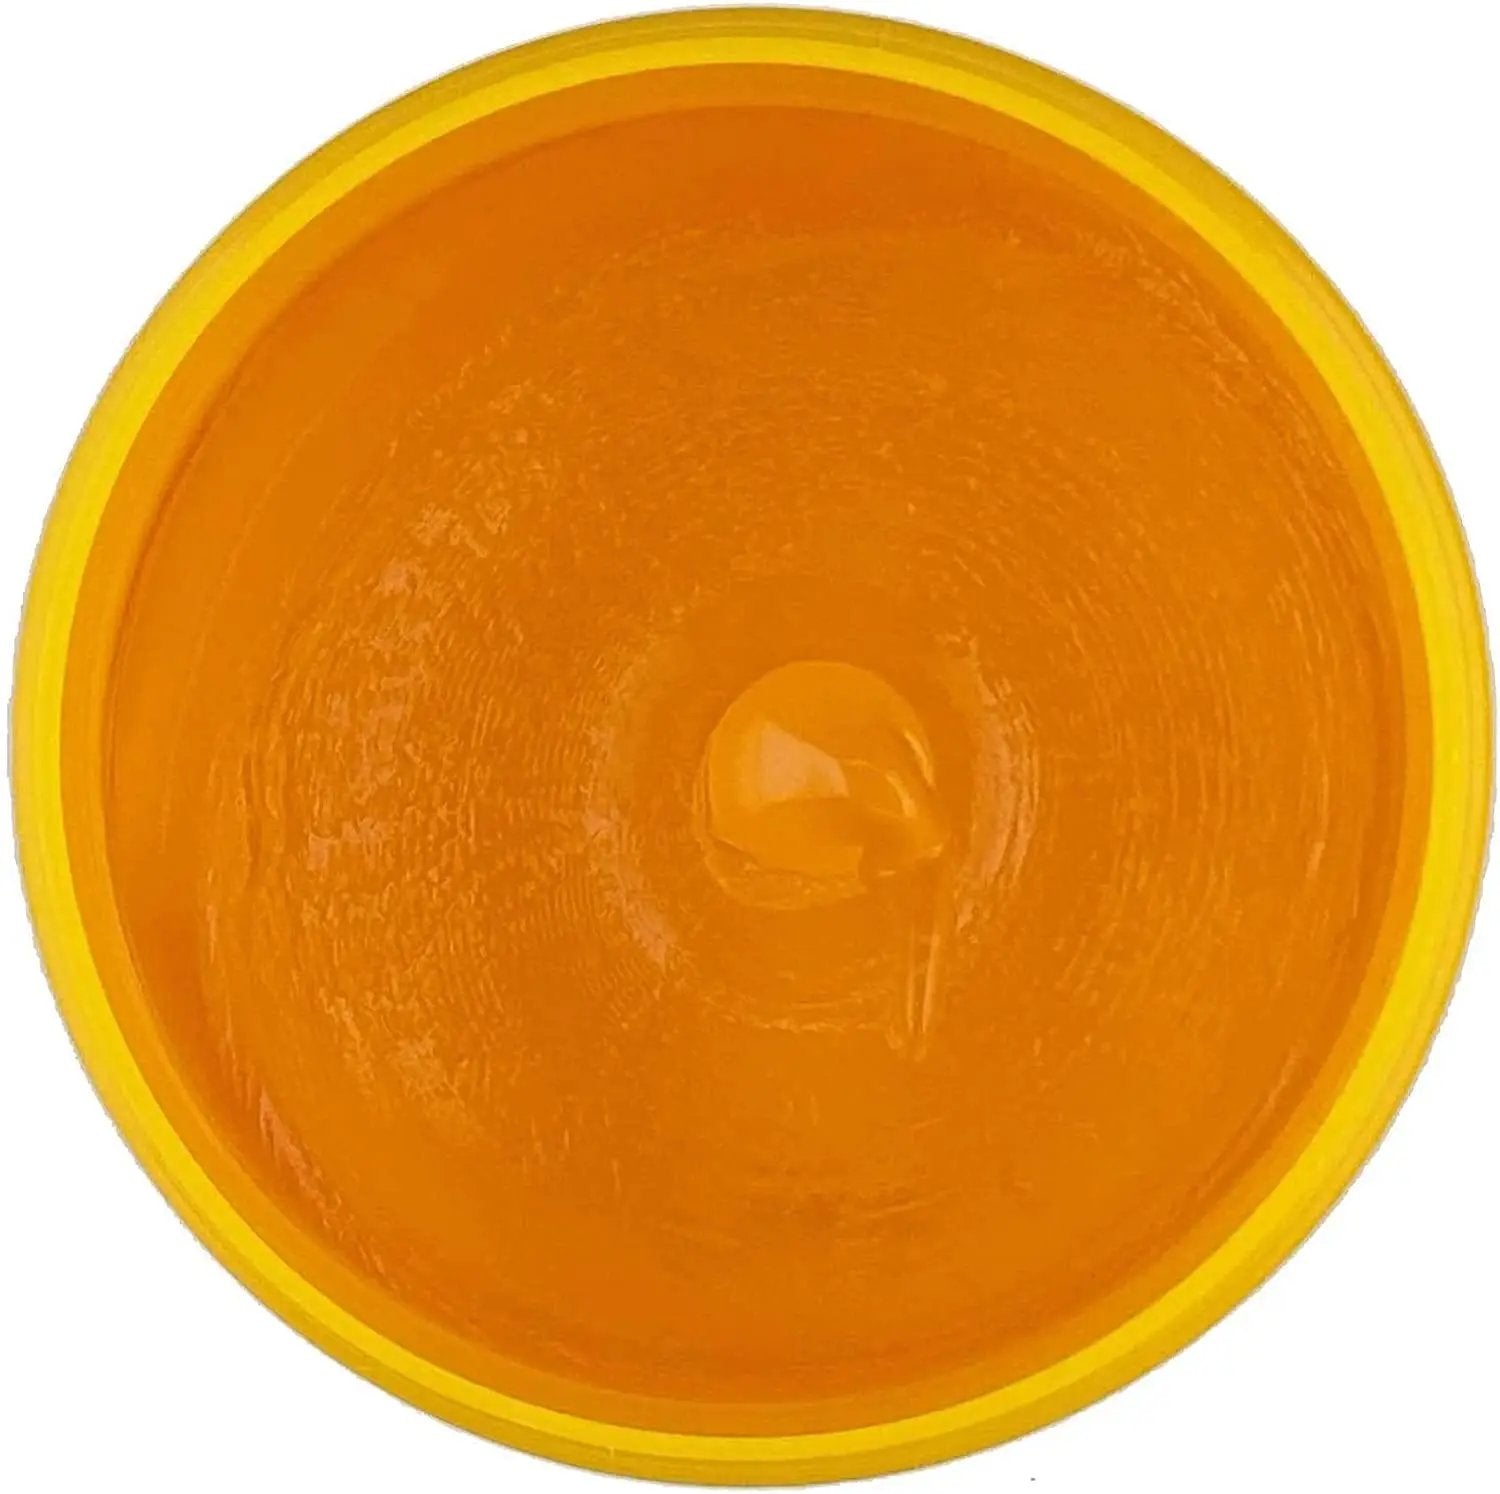 Image of the opened product pictured from the top showing the orange coloured gel.